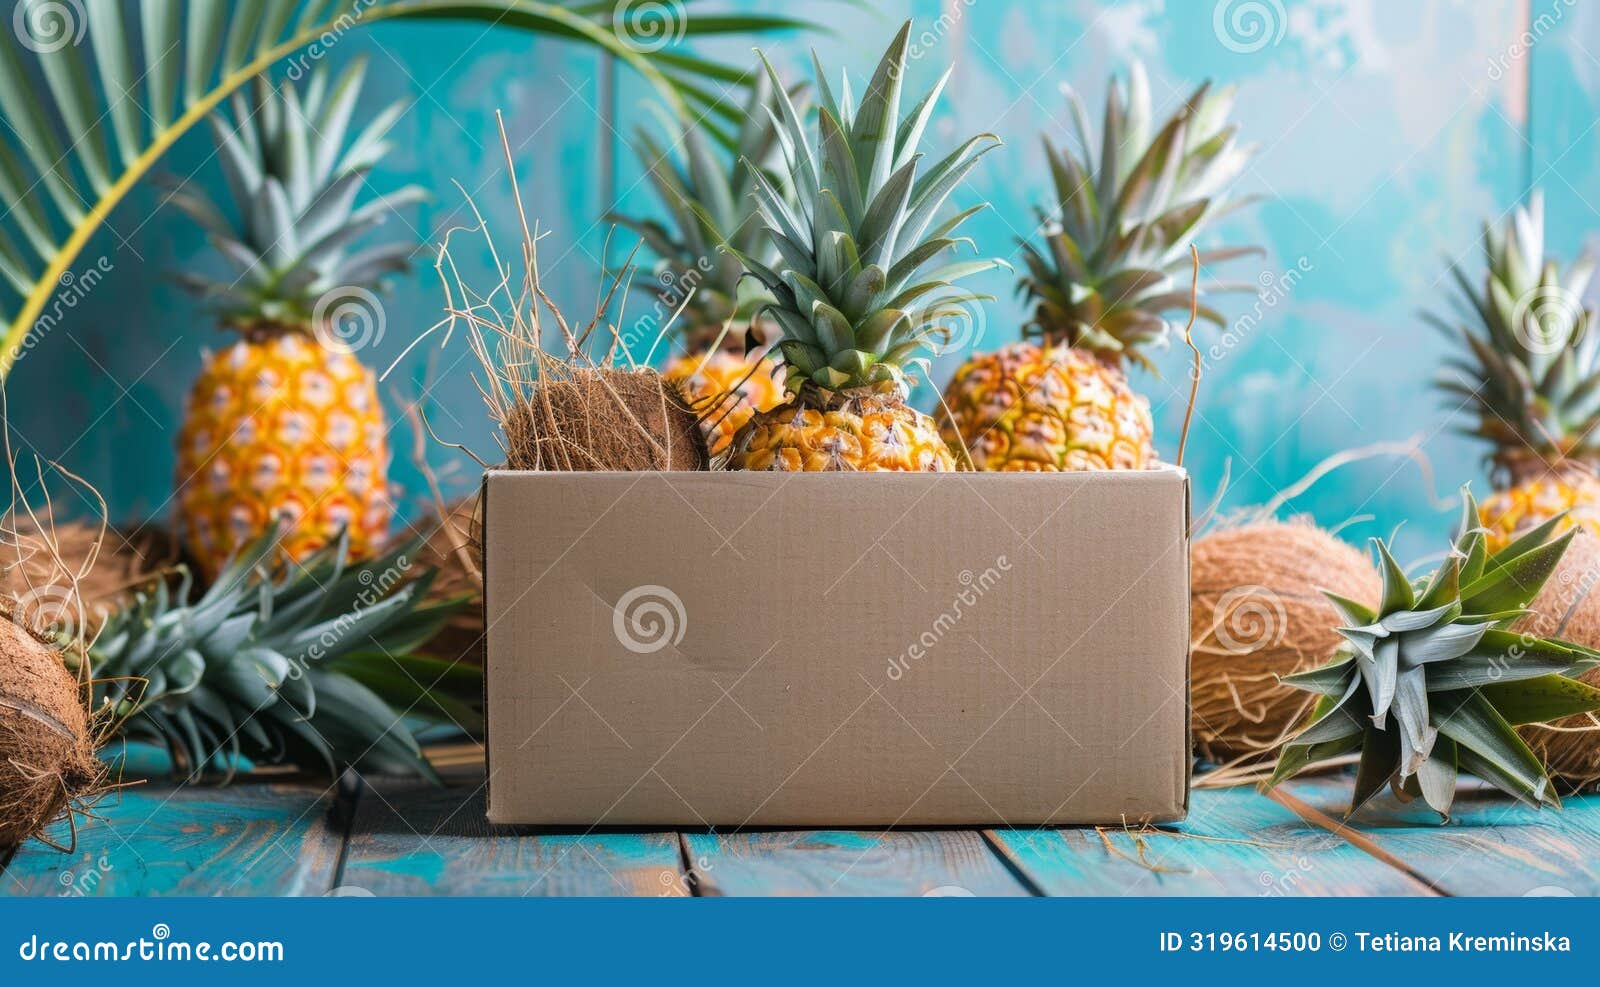 tropical delivery concept featuring a cardboard box filled with vibrant fresh pineapples surrounded by coconut husk